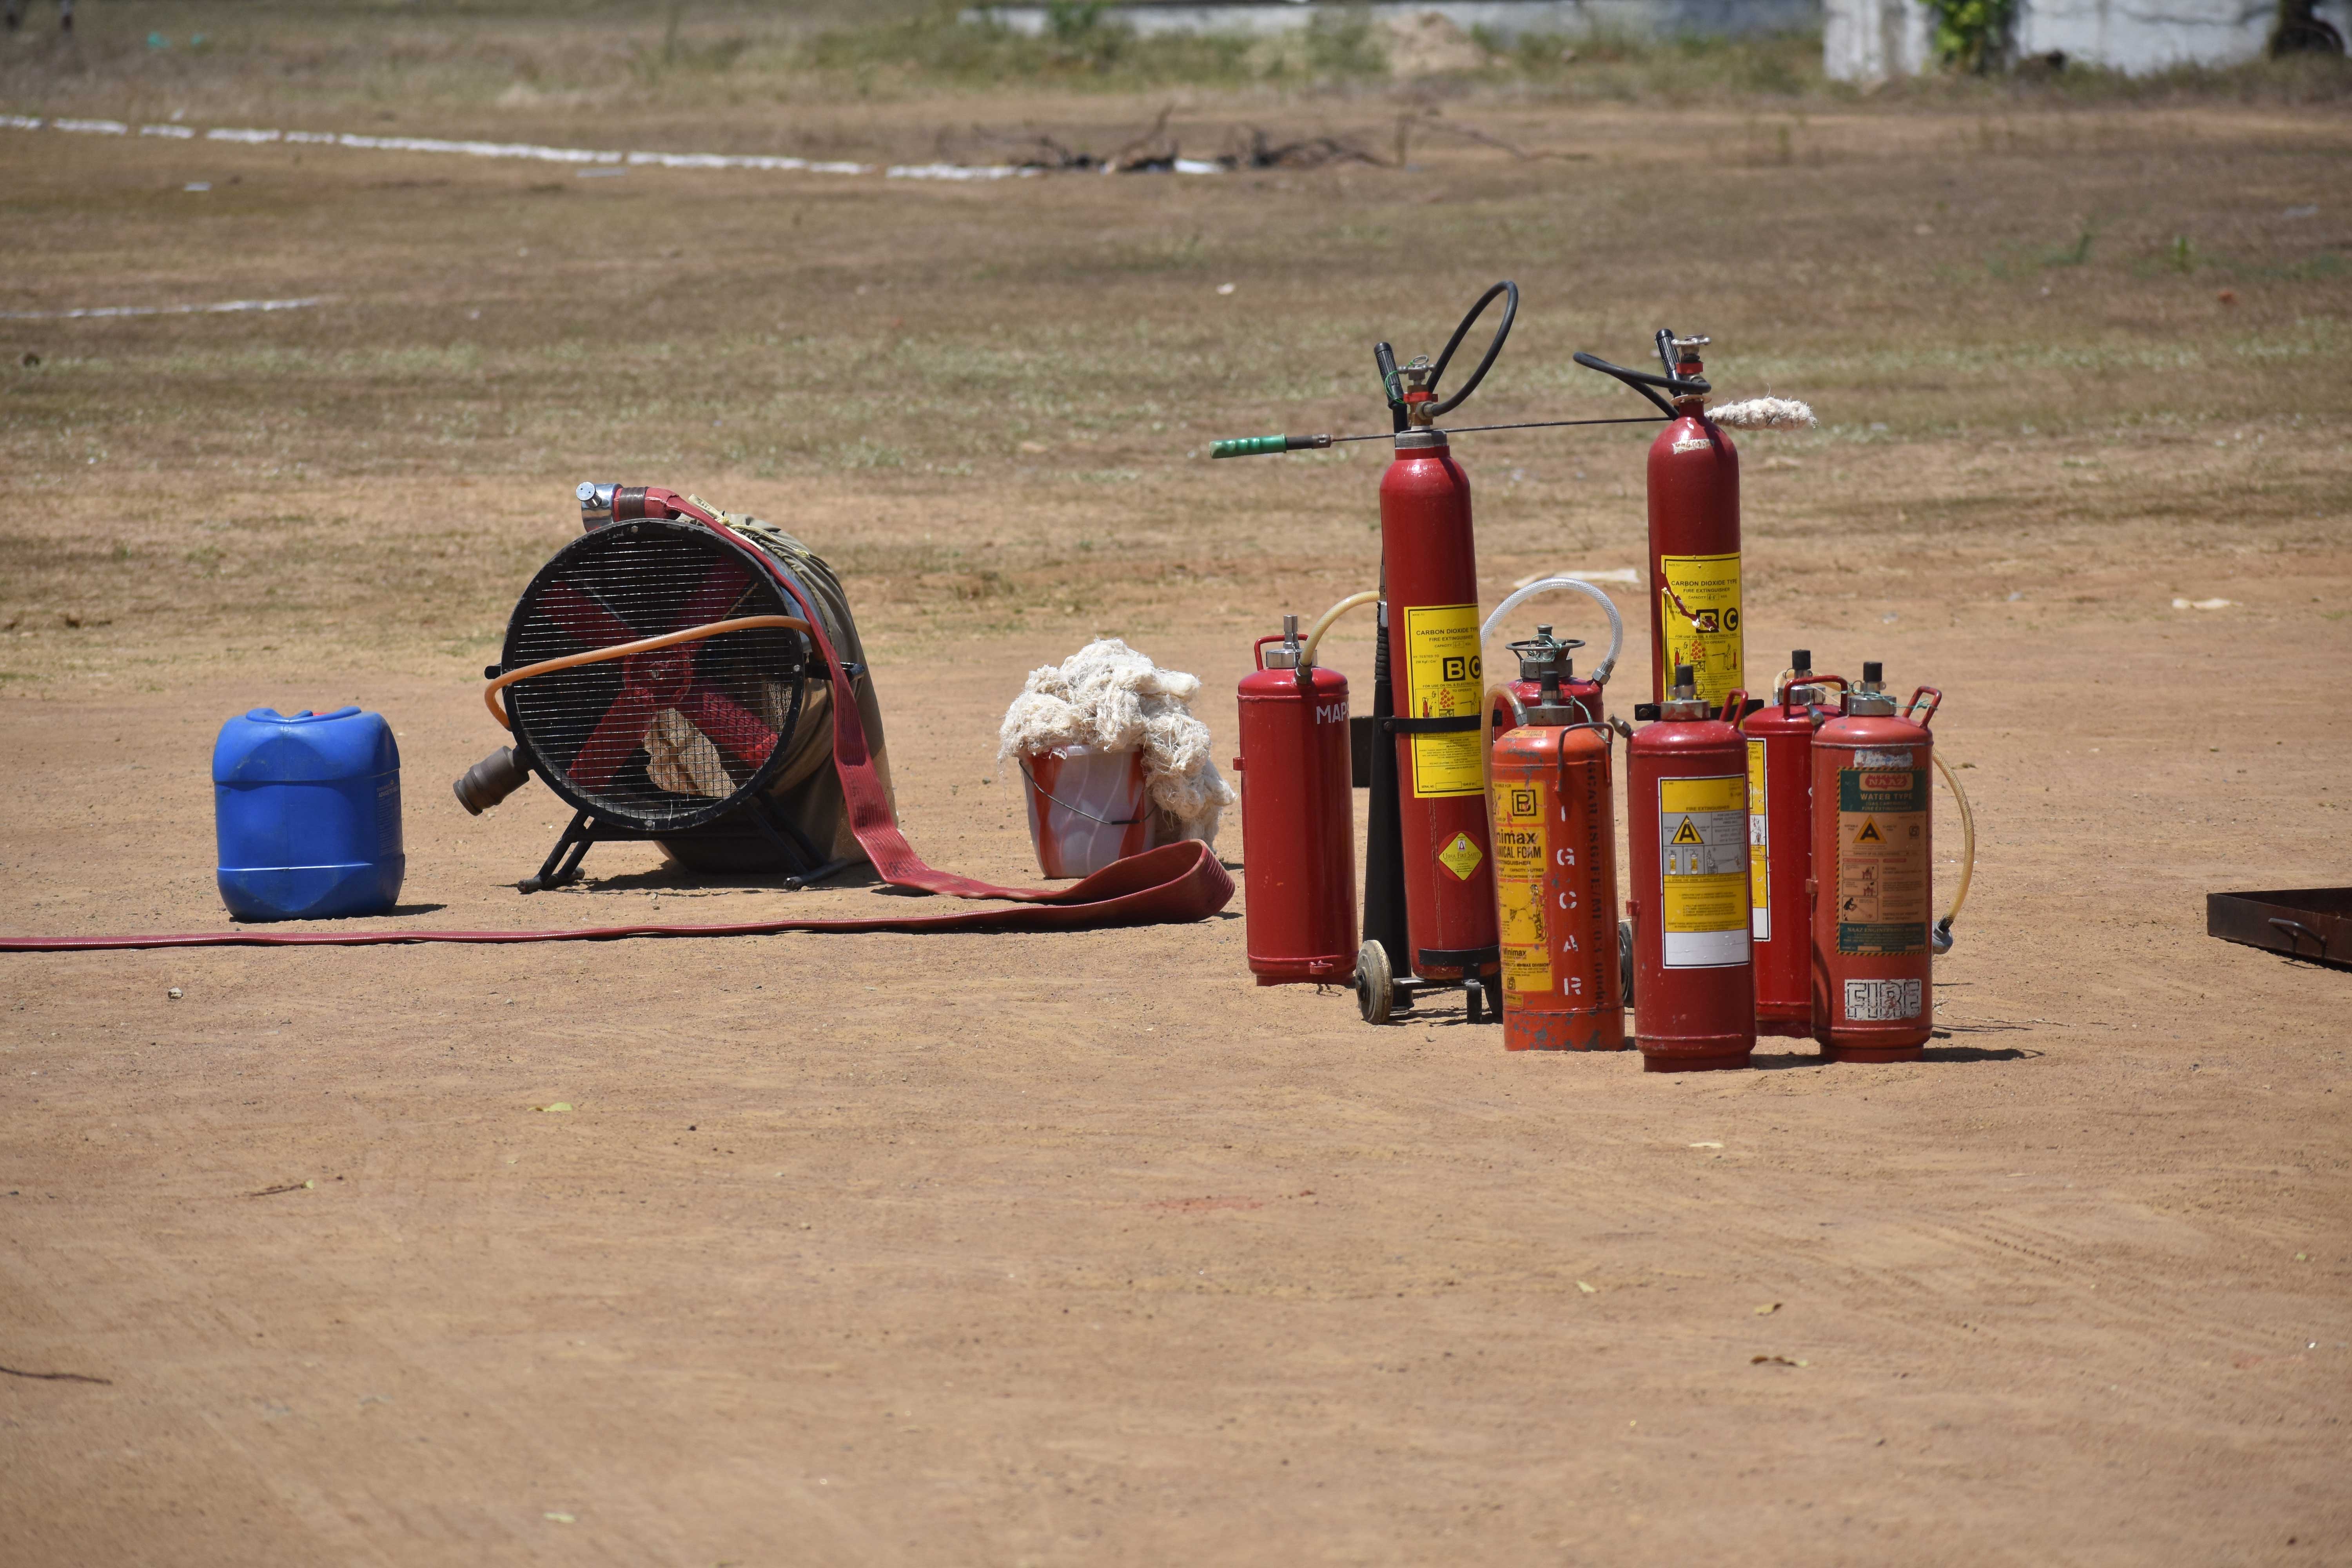 Fire Safety appliances in AVIT for the Fire Safety Programme
